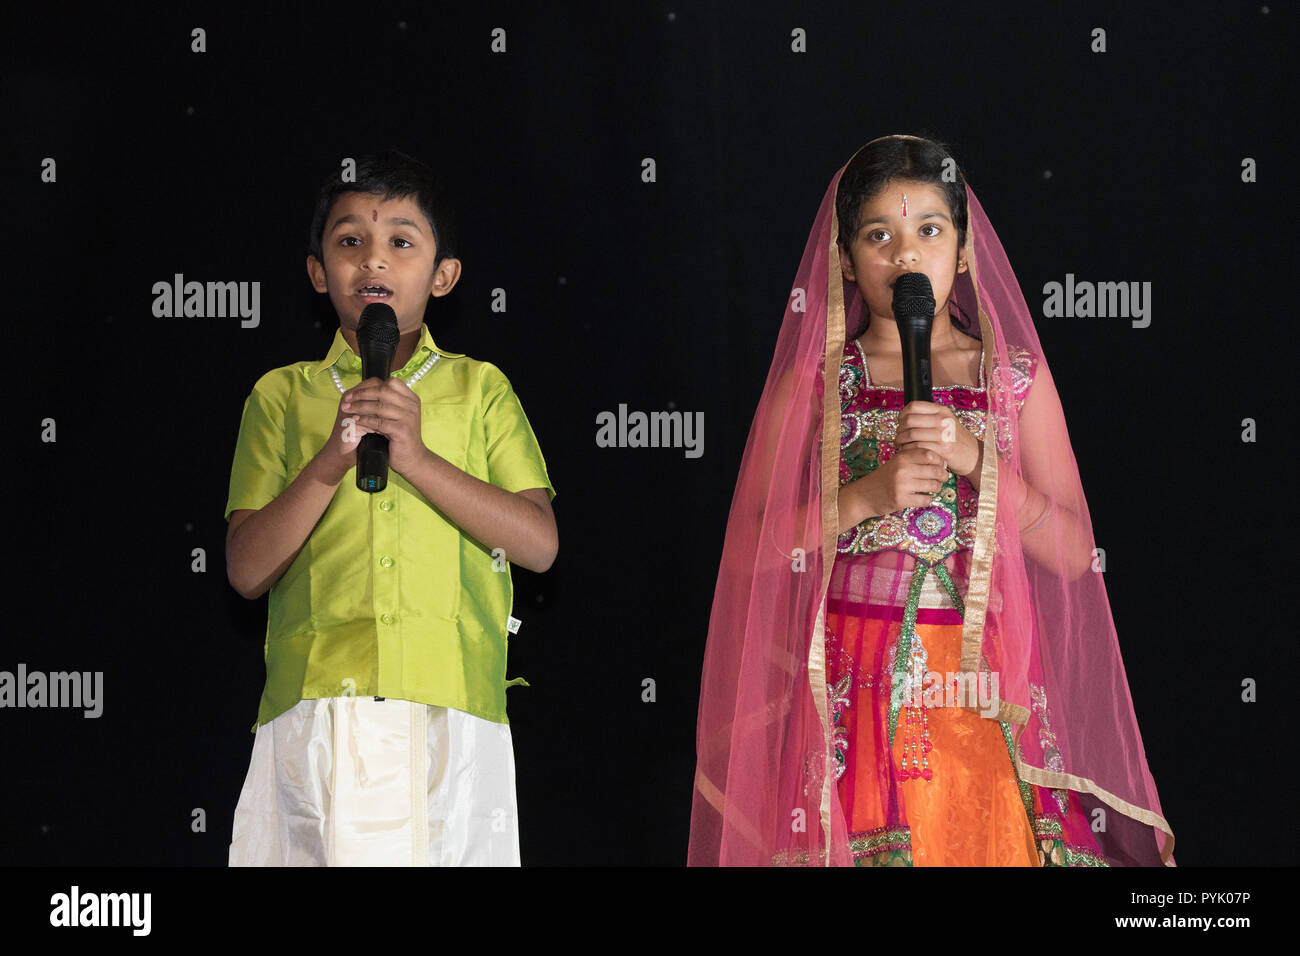 Watford, UK. 27th Oct, 2018. Two children sing a song during a Diwali celebration at the Holywell Community Centre in Watford. Photo date: Saturday, October 27, 2018. Photo: Roger Garfield/Alamy Live News Credit: Roger Garfield/Alamy Live News Stock Photo